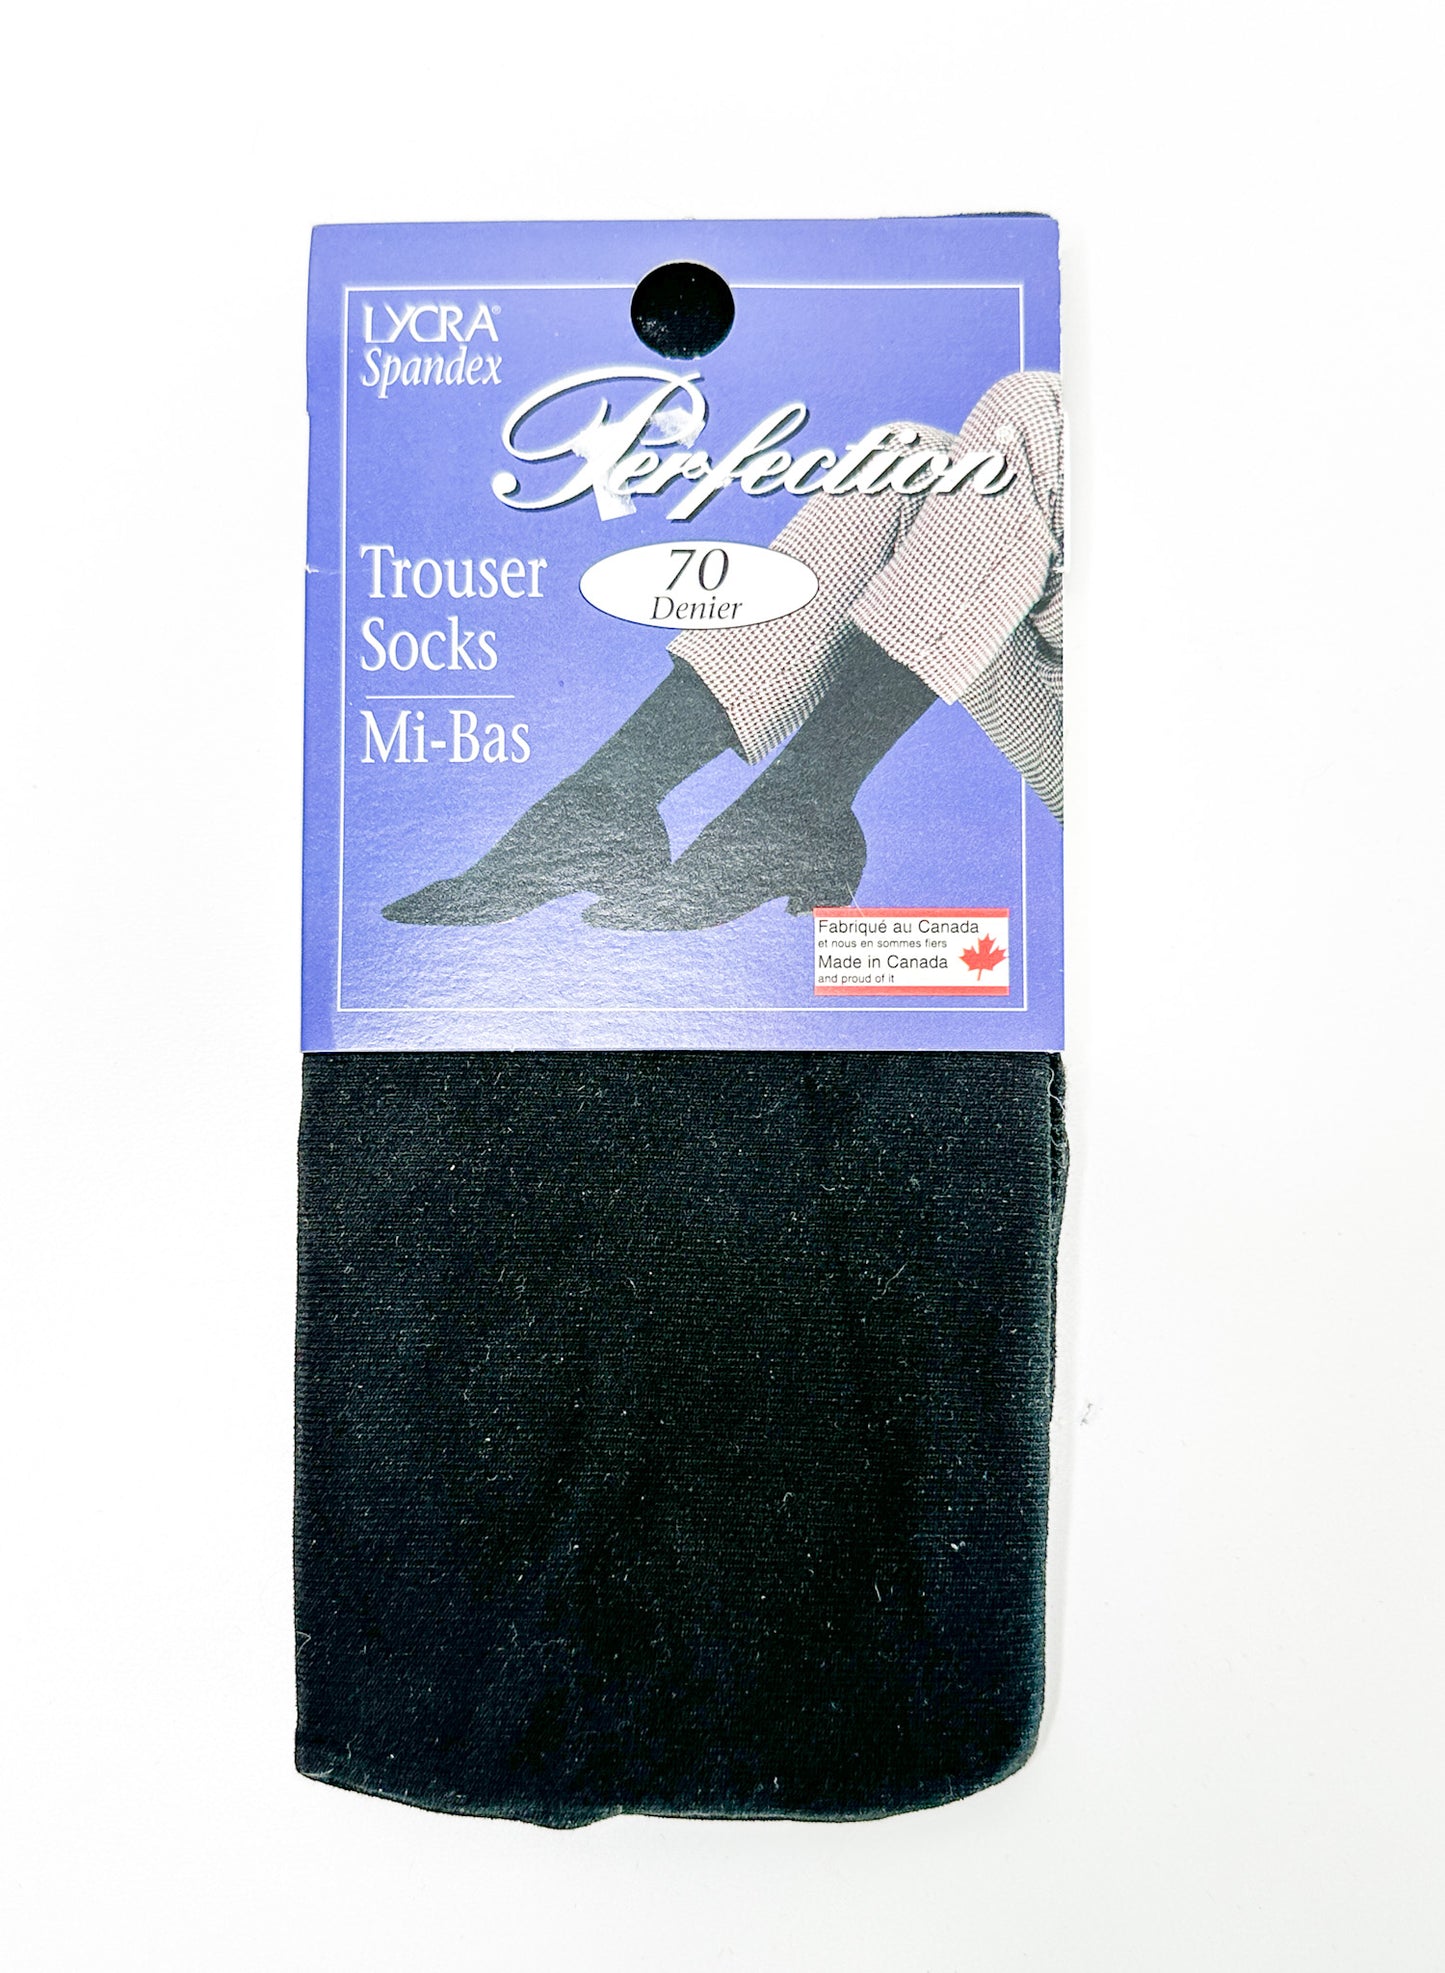 Vintage Perfection Trousers Socks | Vintage Hoisery| One Size  | NEW in Package